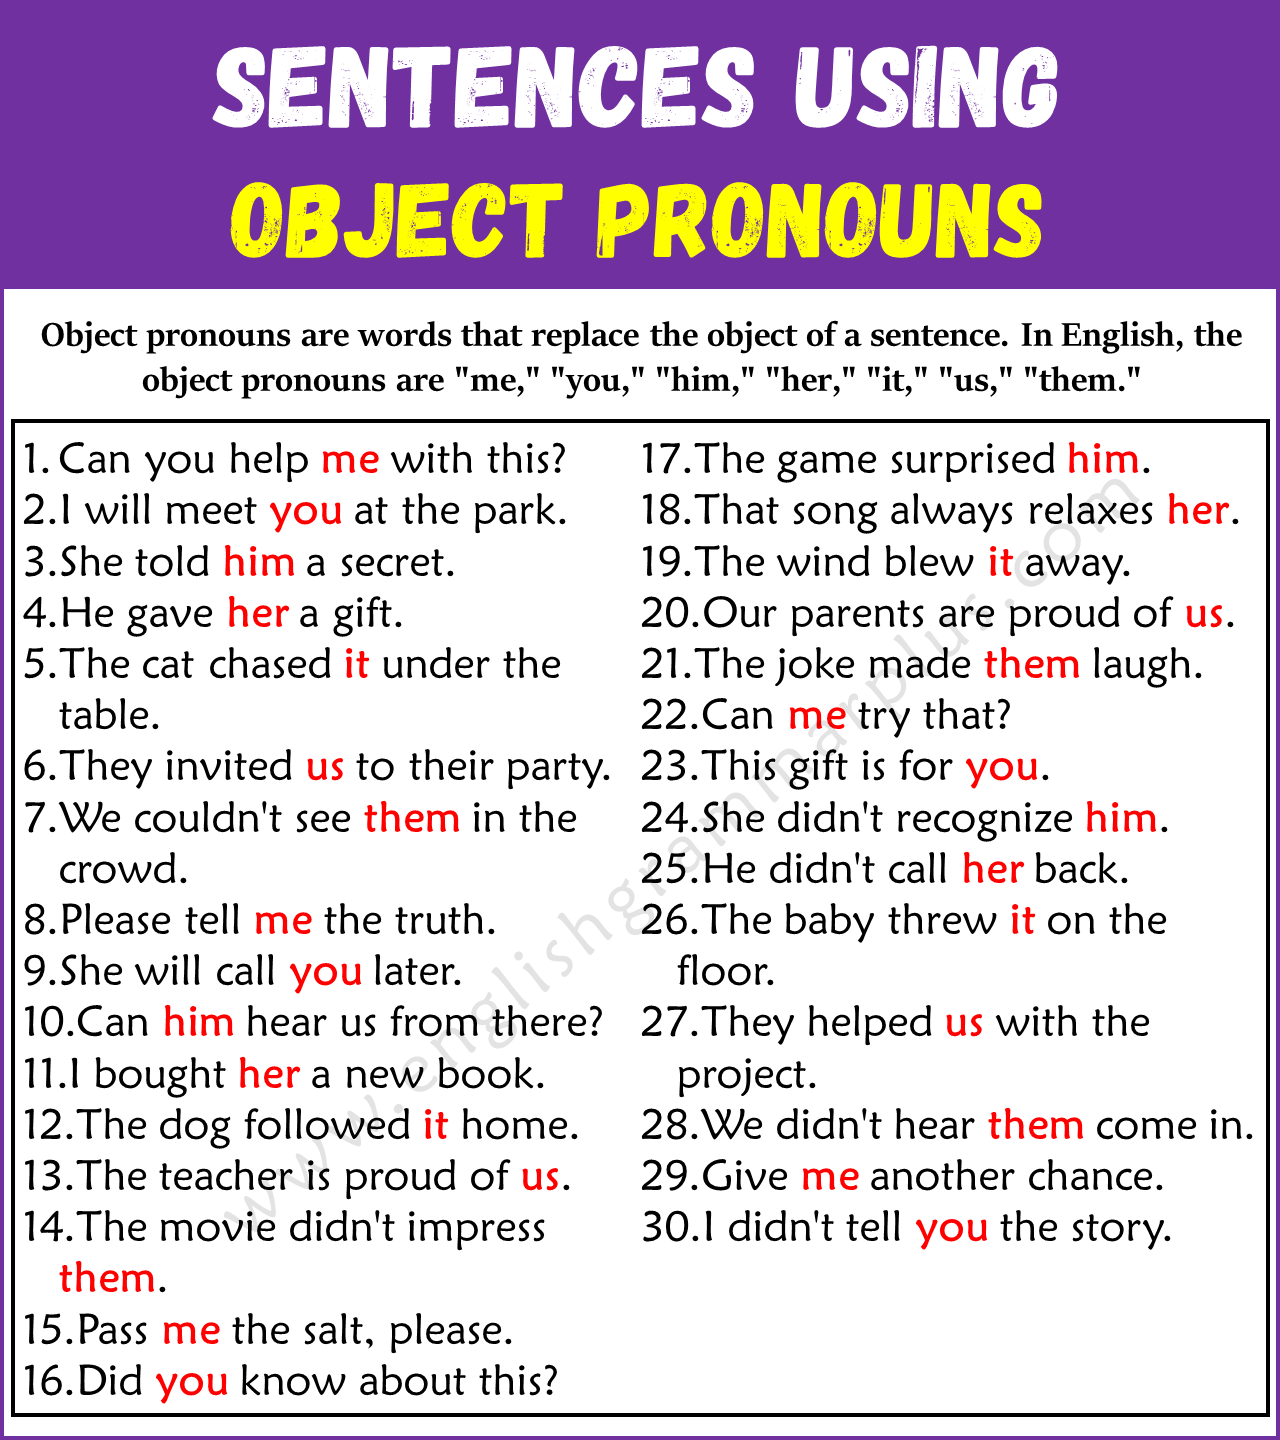 Examples of Object Pronouns in Sentences